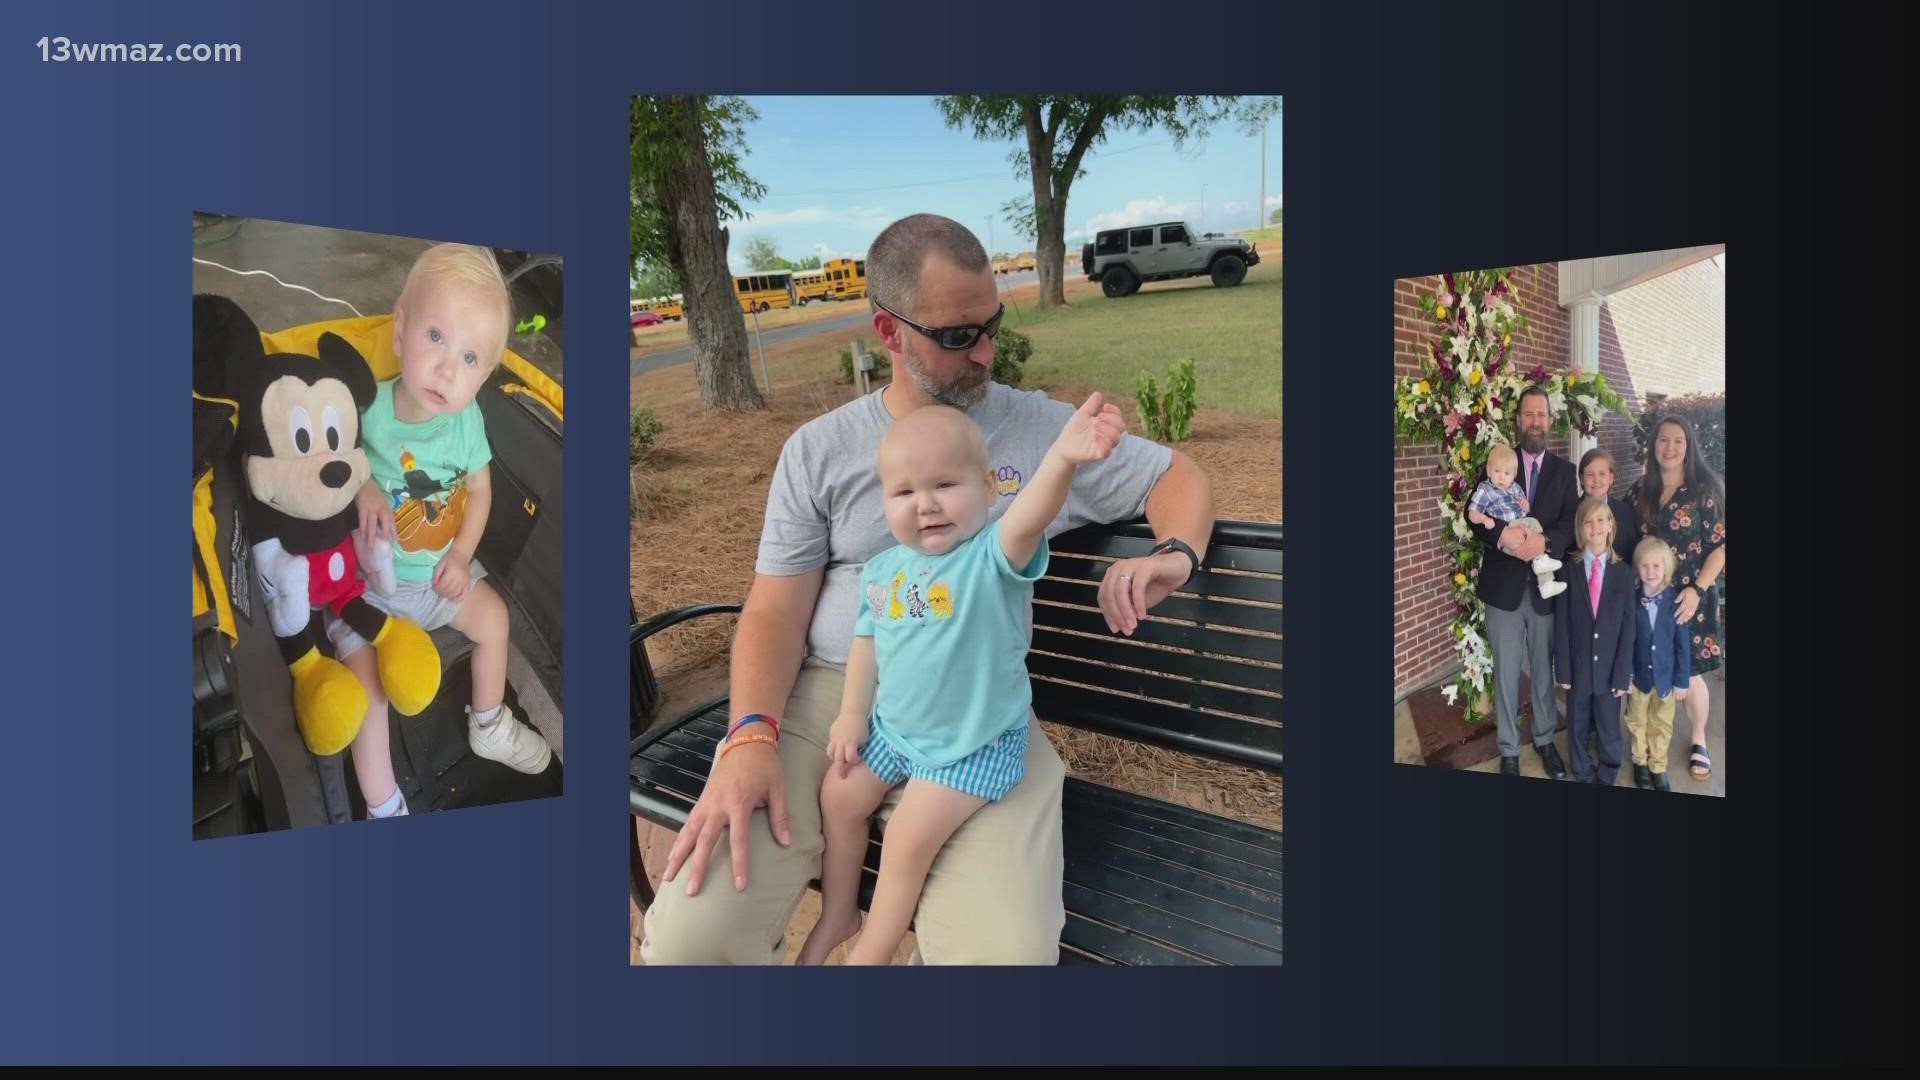 A family friend in Jones County is starting a 5K Glow Run fundraiser to support a baby boy diagnosed with a rare cancer.